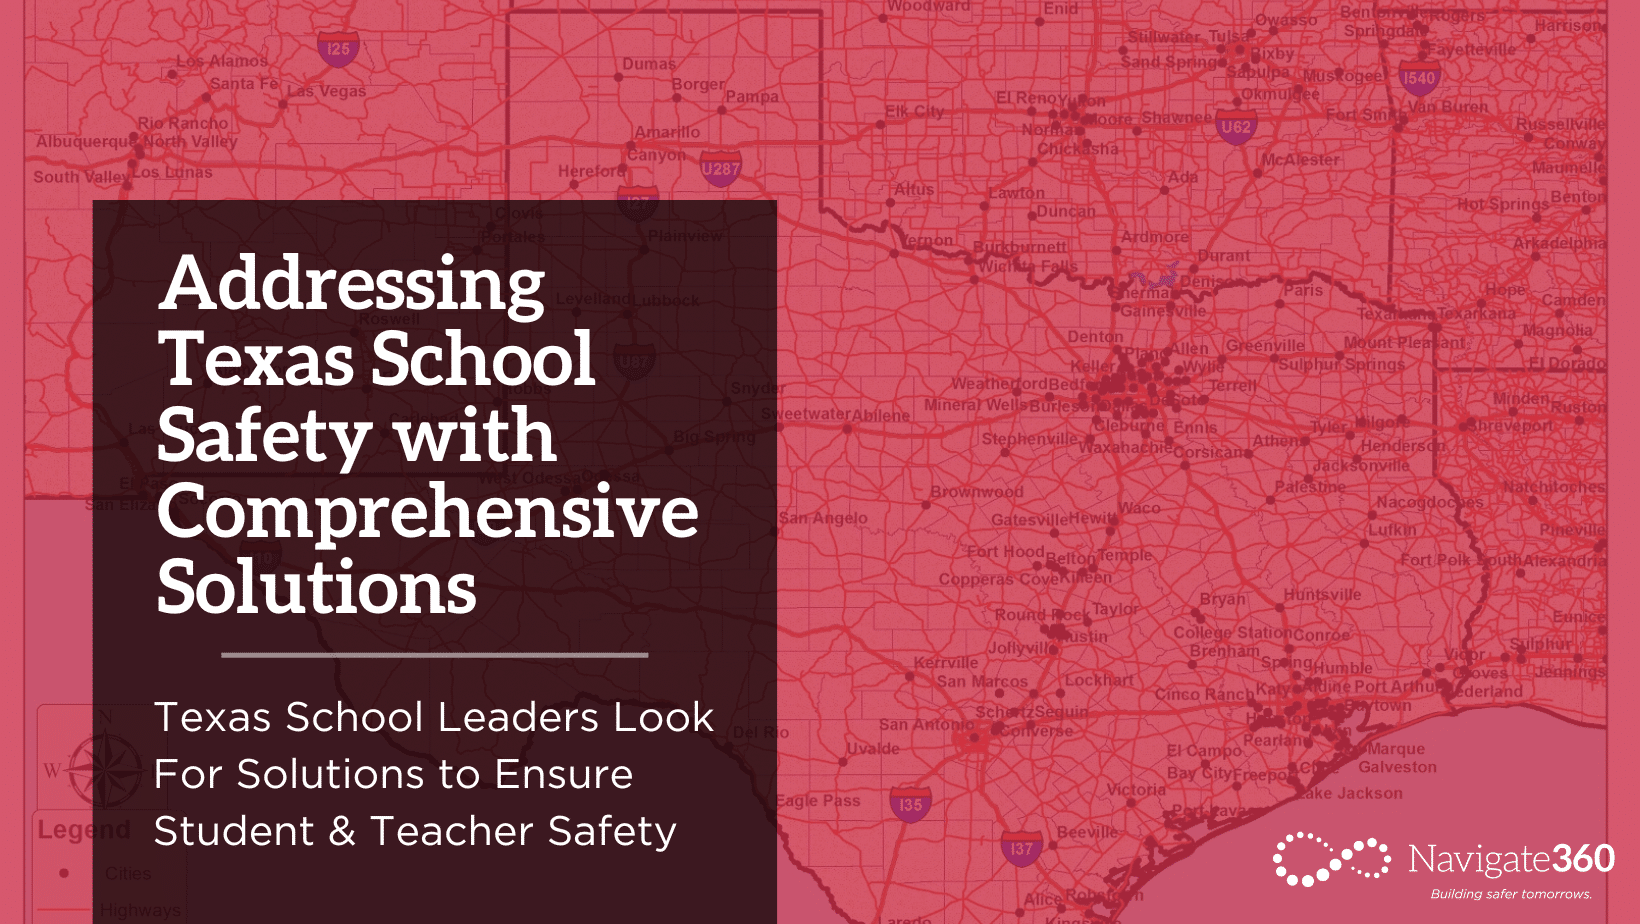 Addressing Texas School Safety with Comprehensive Solutions